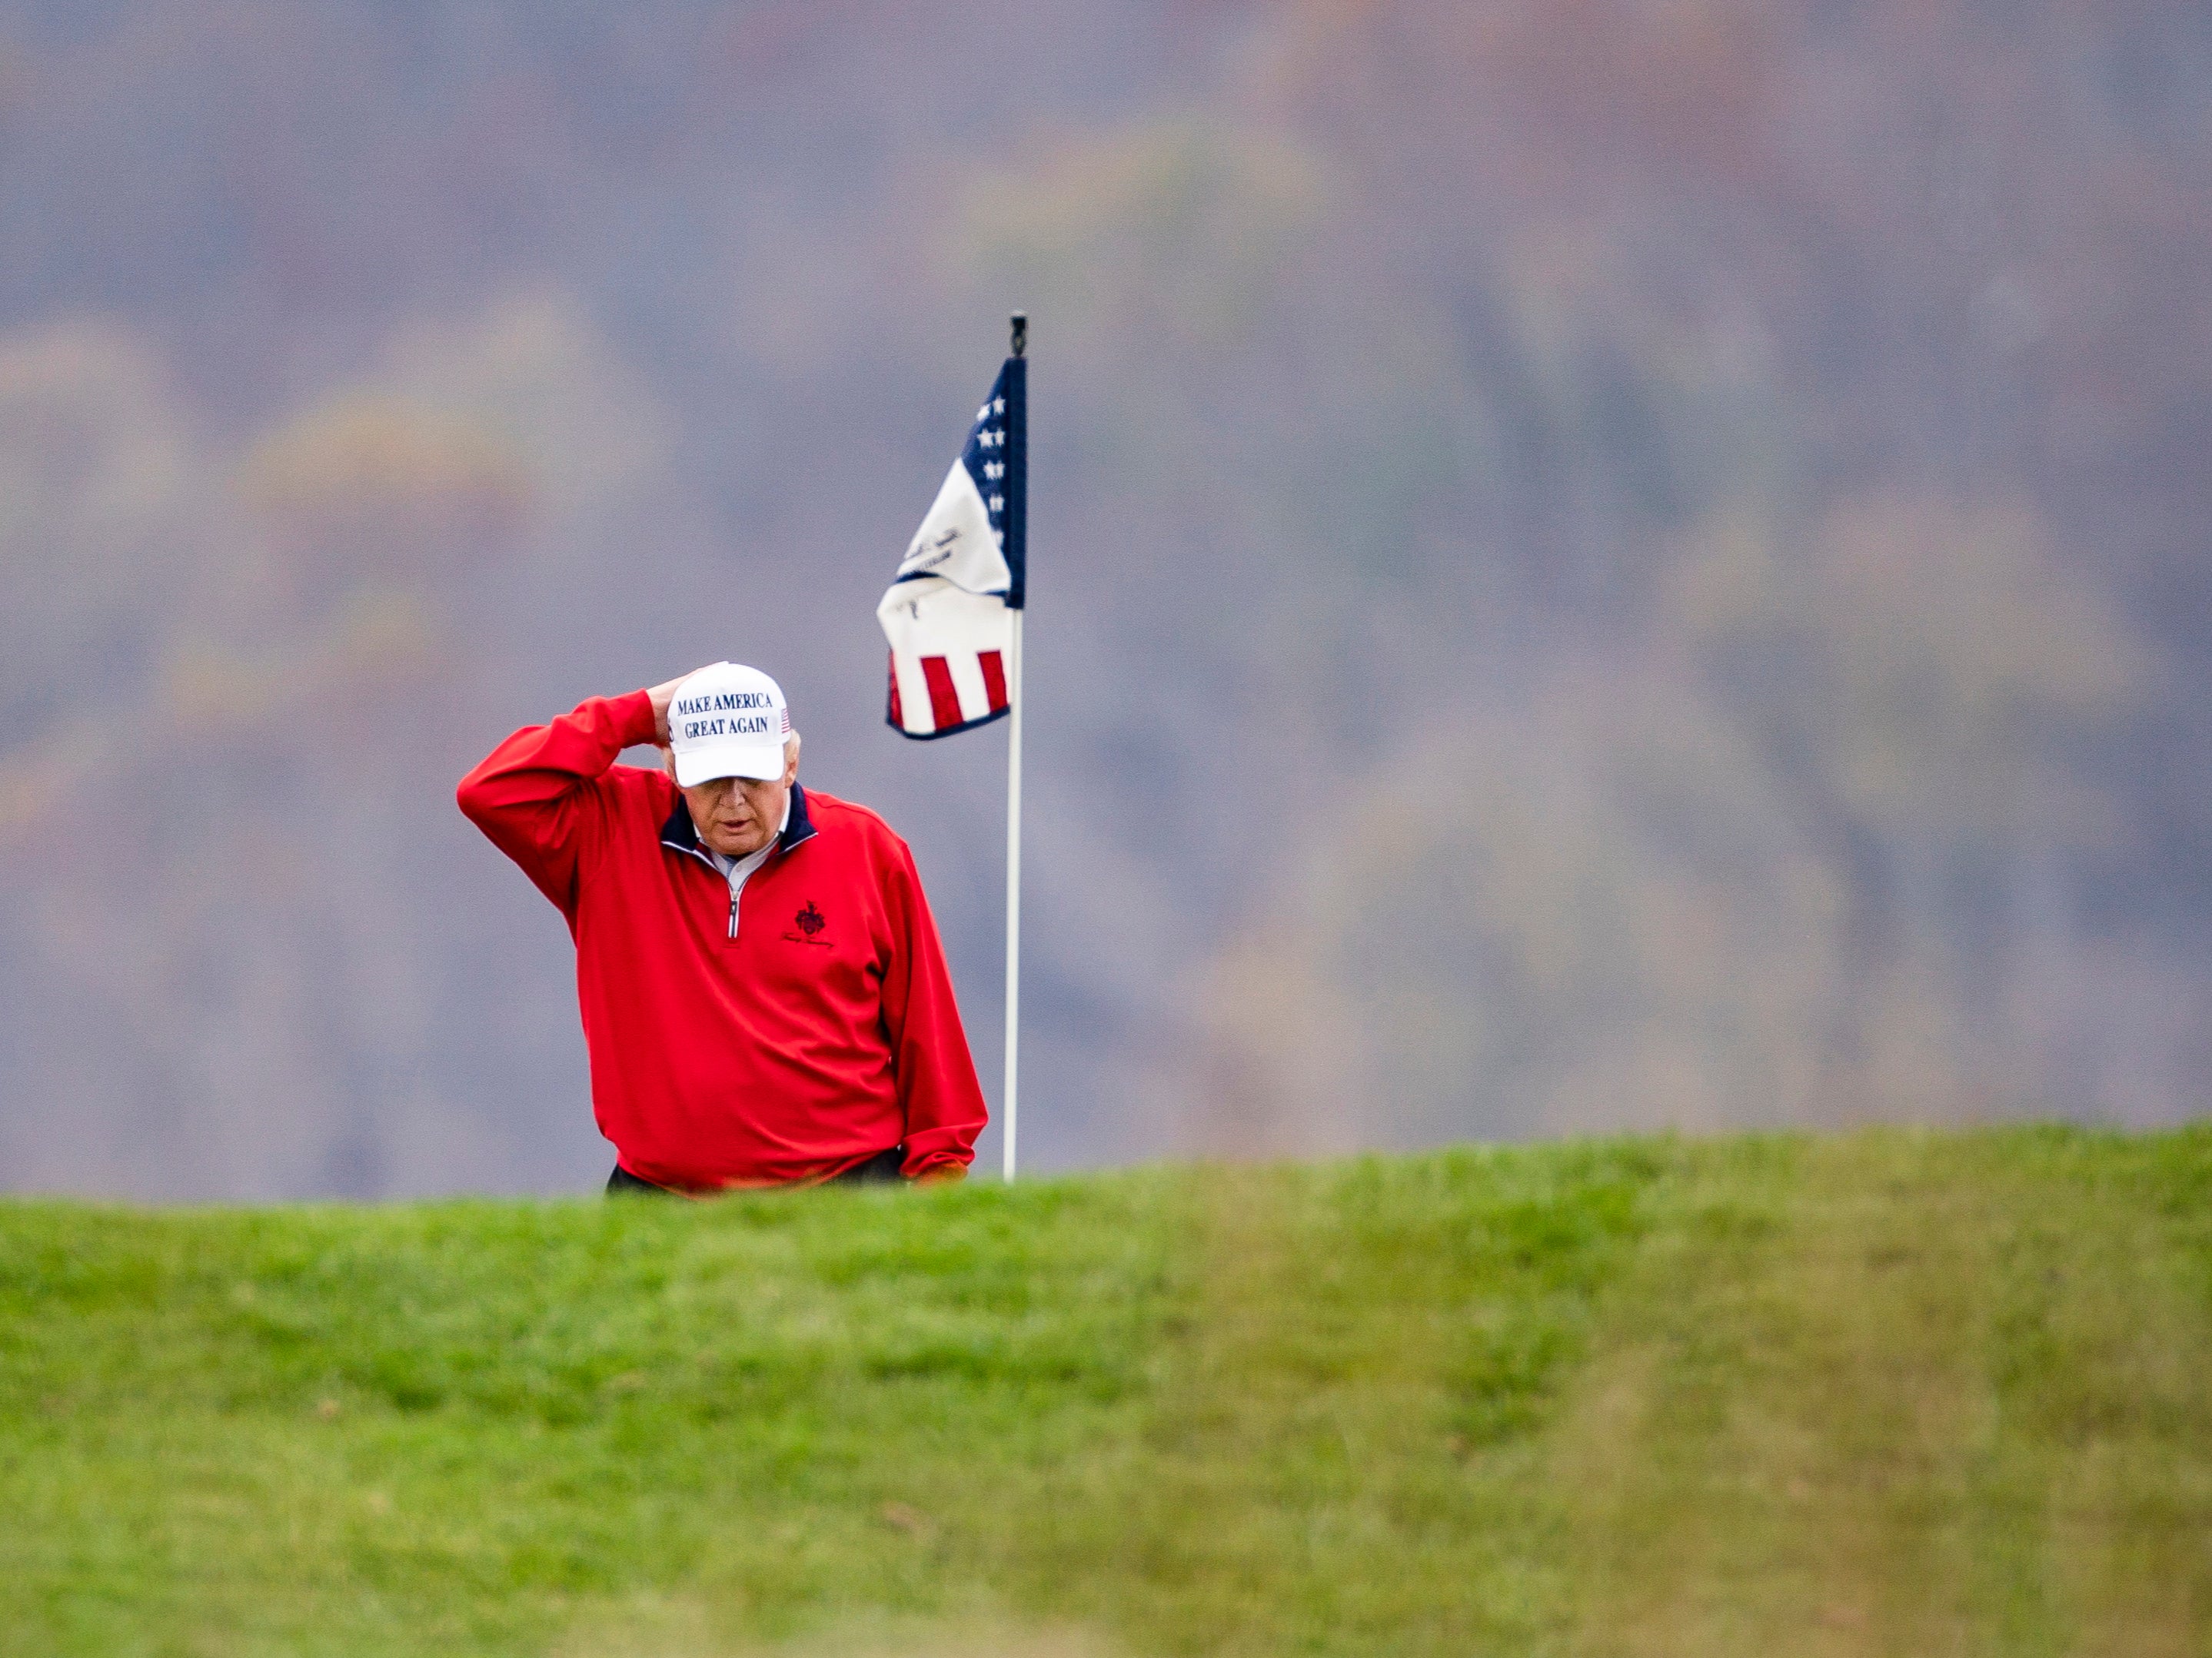 President Donald Trump plays golf for the 143rd time since becoming president at the Trump National Golf Club in Sterling, Virginia, USA, 21 November 2020